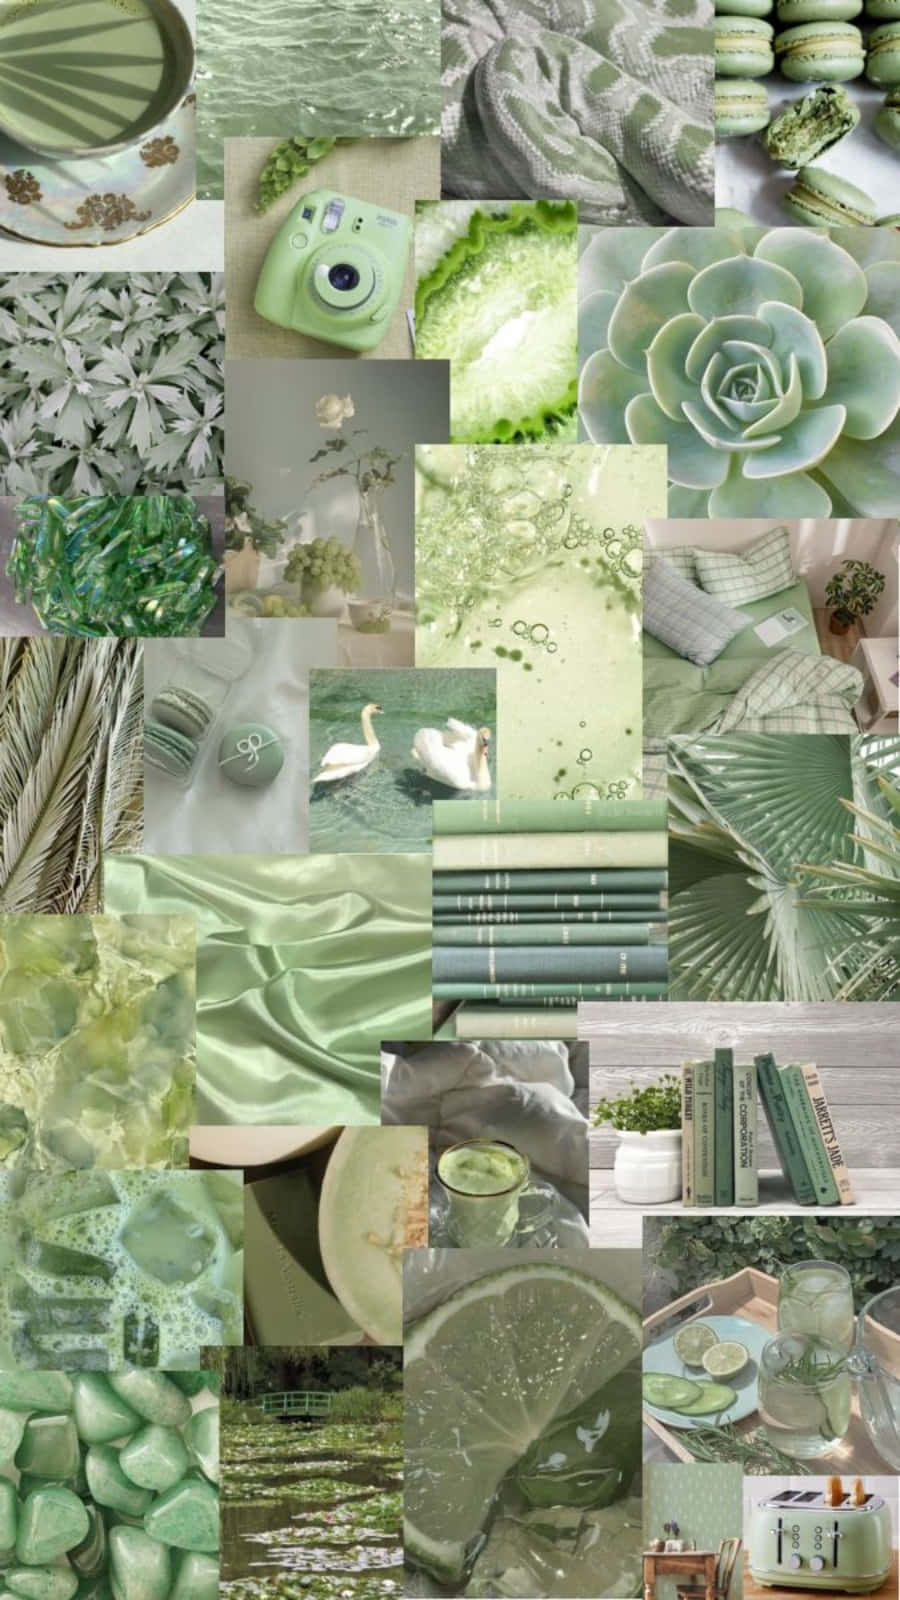 Download The Freshening Aesthetic of Sage Green | Wallpapers.com